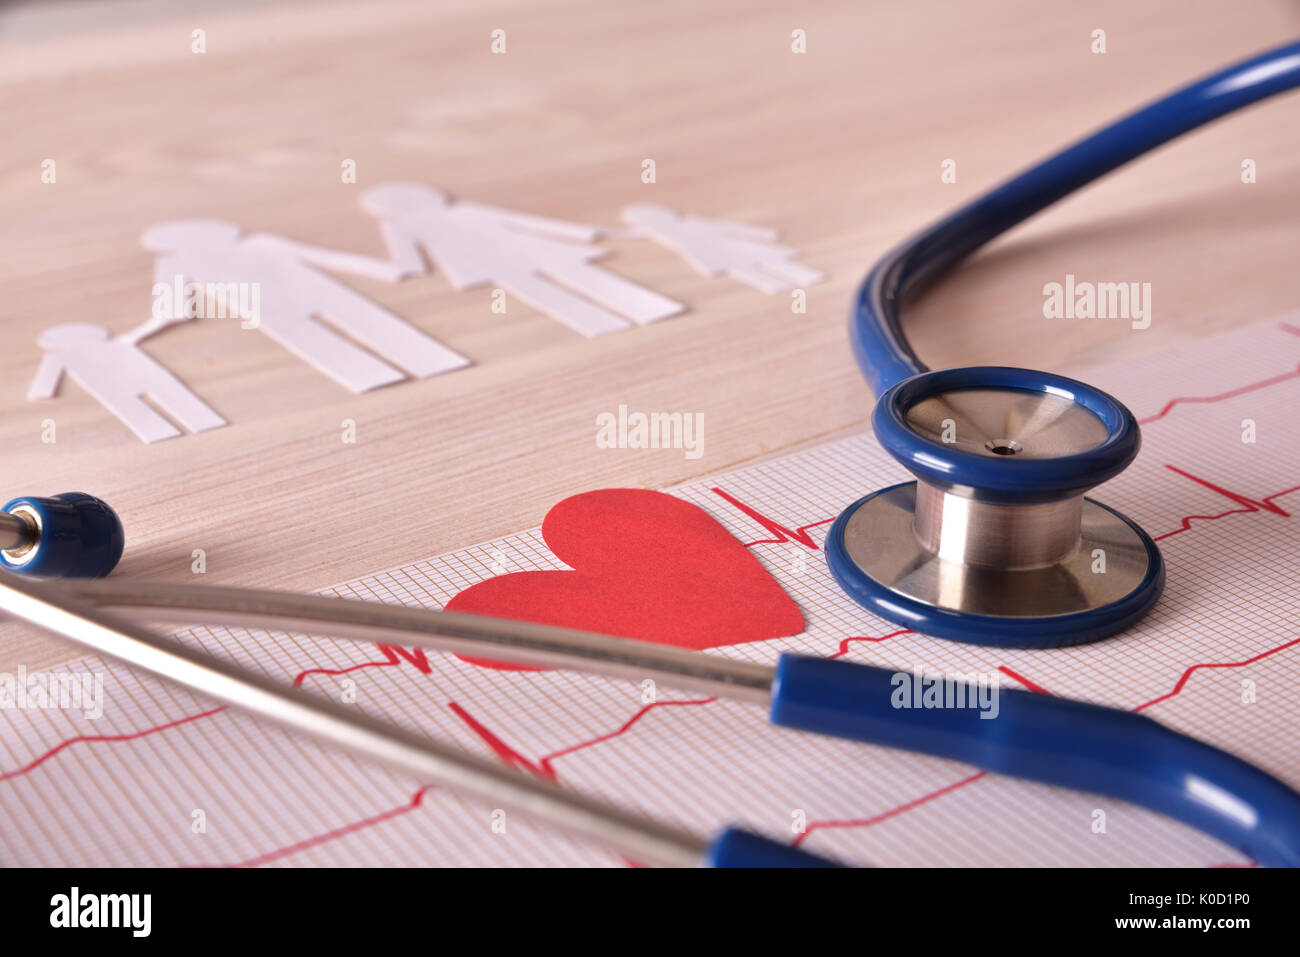 Electrocardiogram stethoscope and paper cutout heart and family on wood table. Elevated view. Horizontal composition. Stock Photo